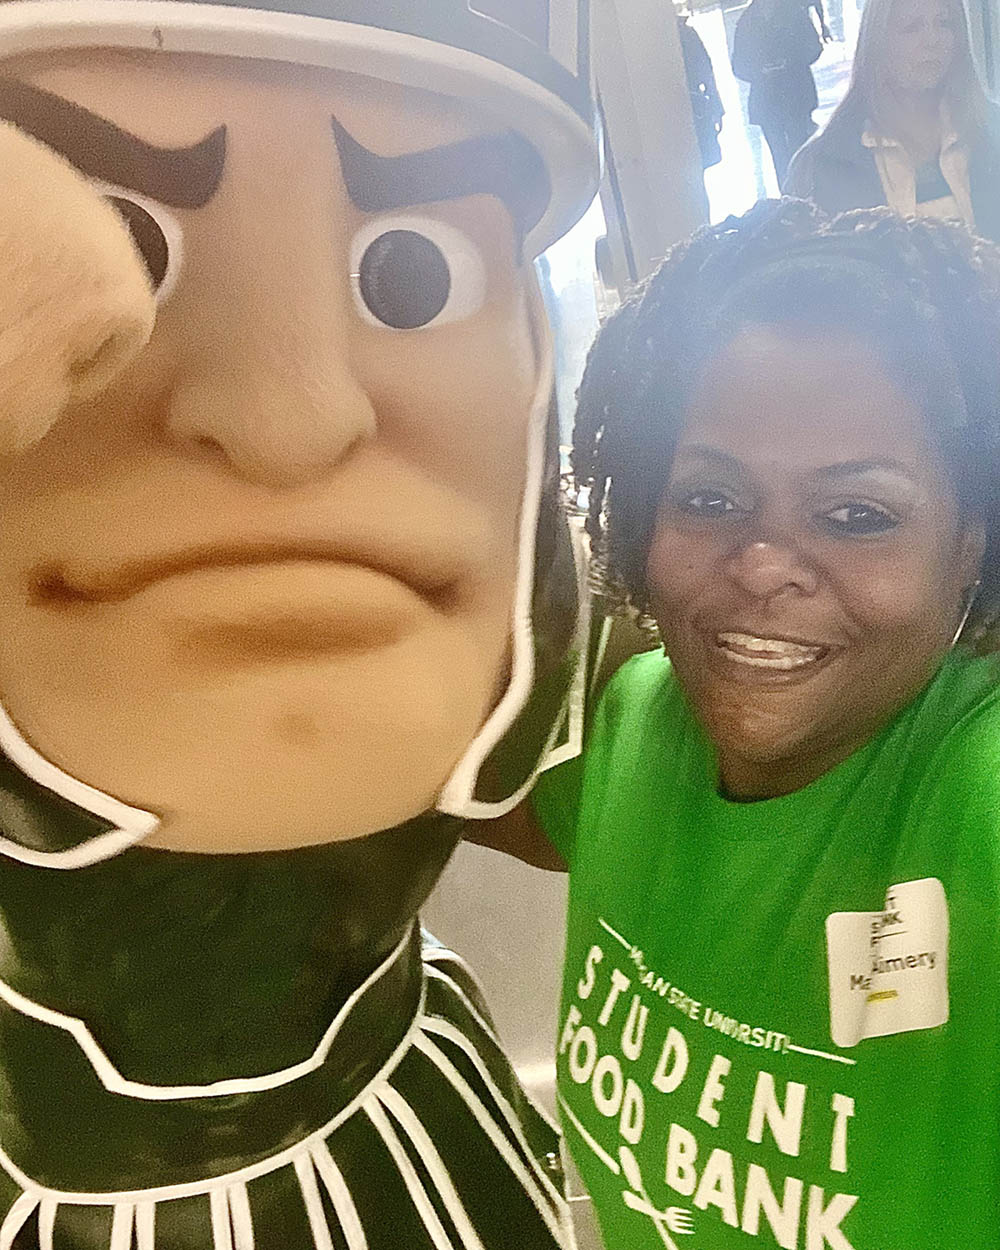 Sparty with Margie Aimery